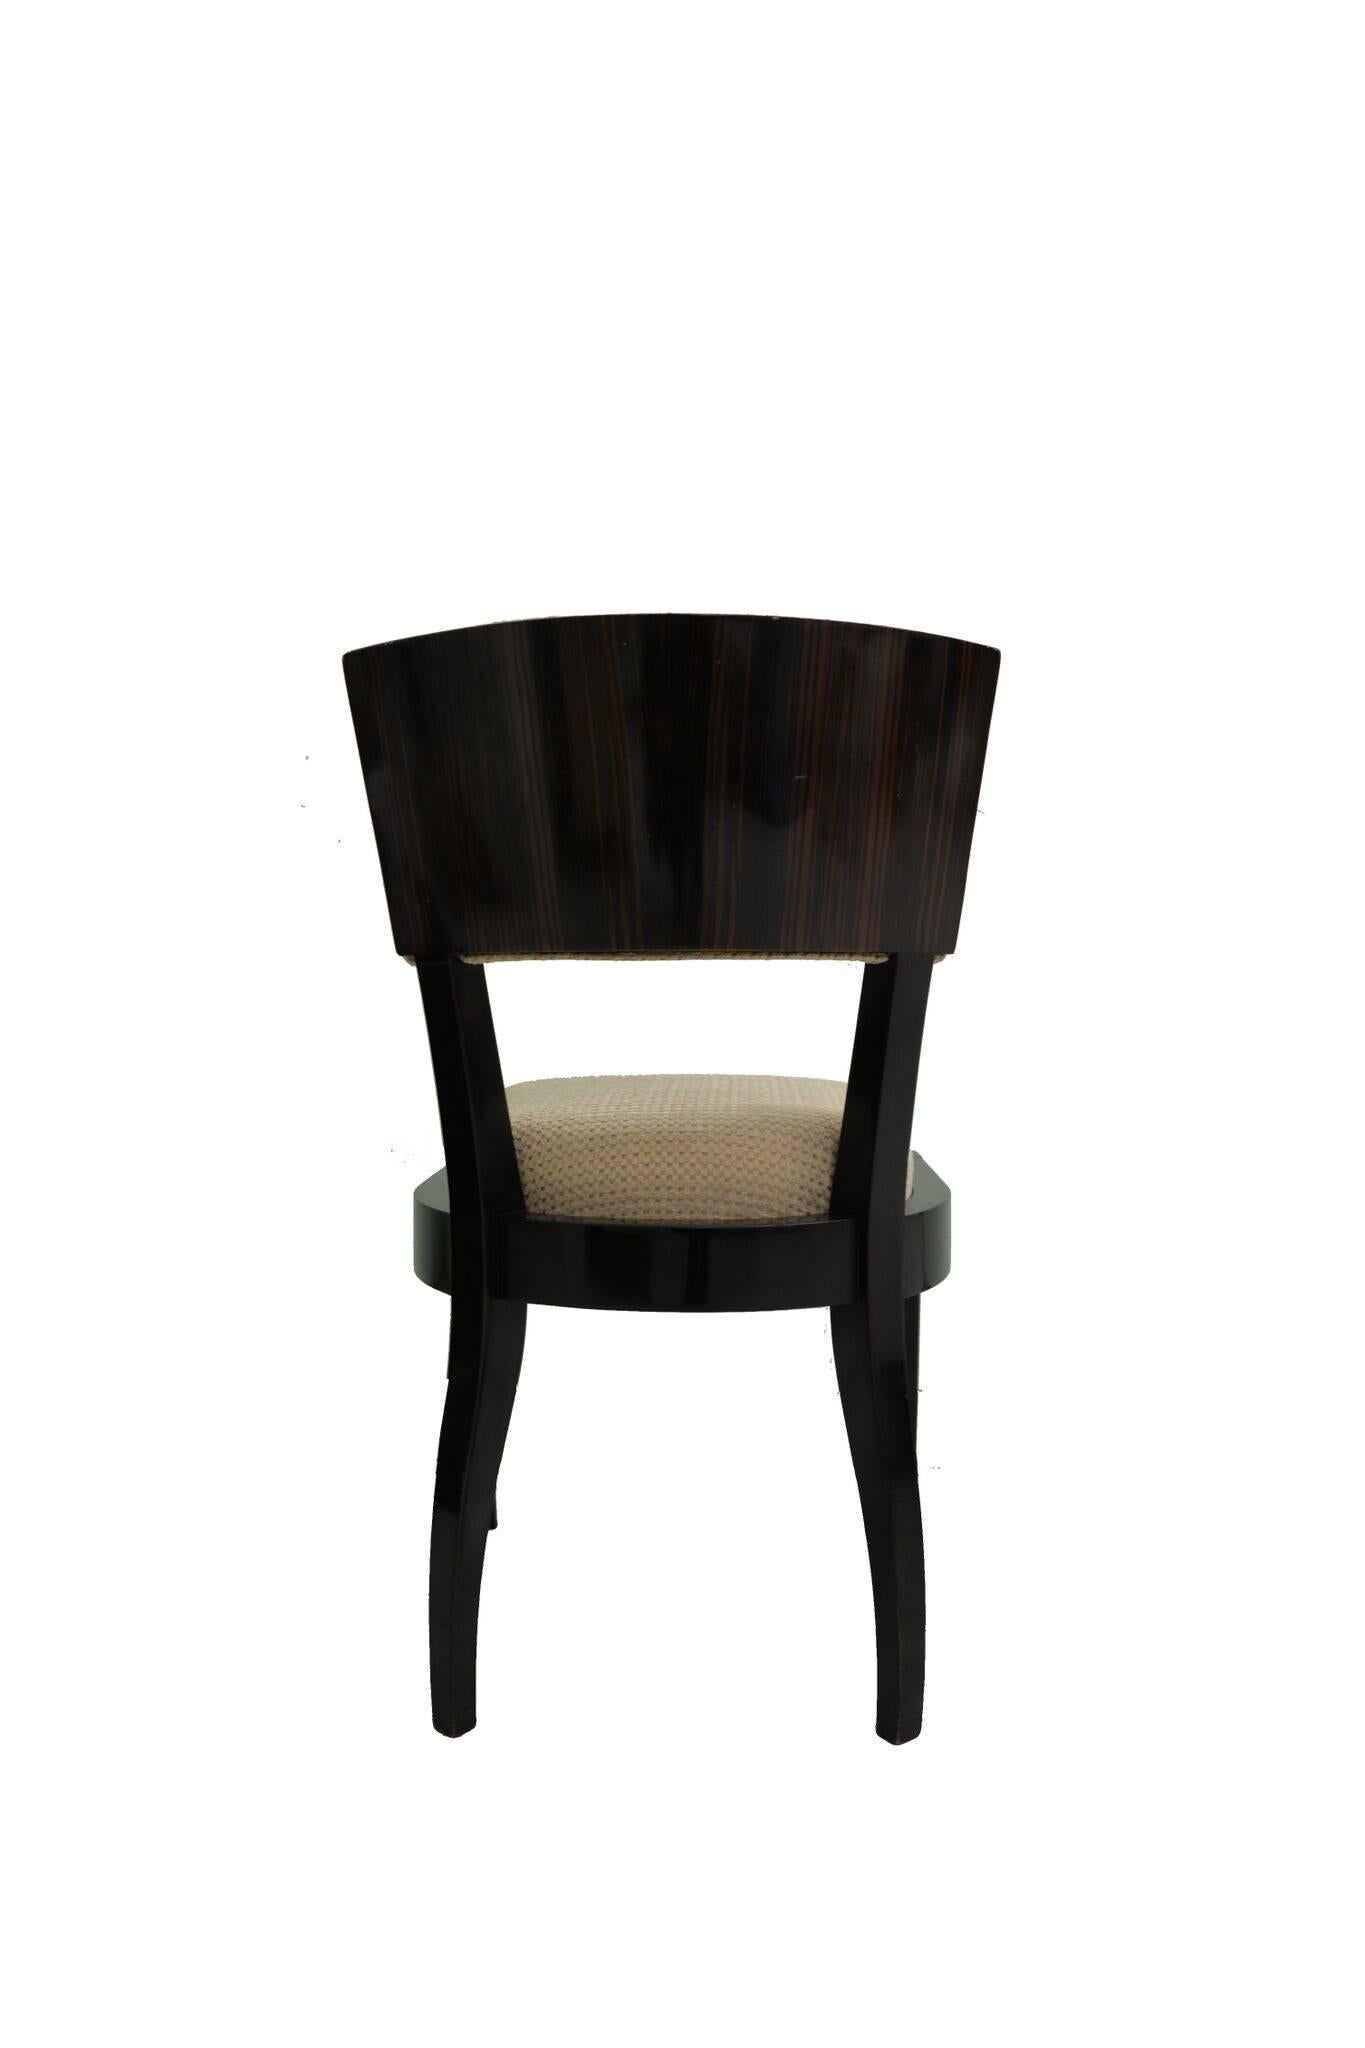 Six Art Deco dining chairs of Macassar ebony wood frame with beige fabric.